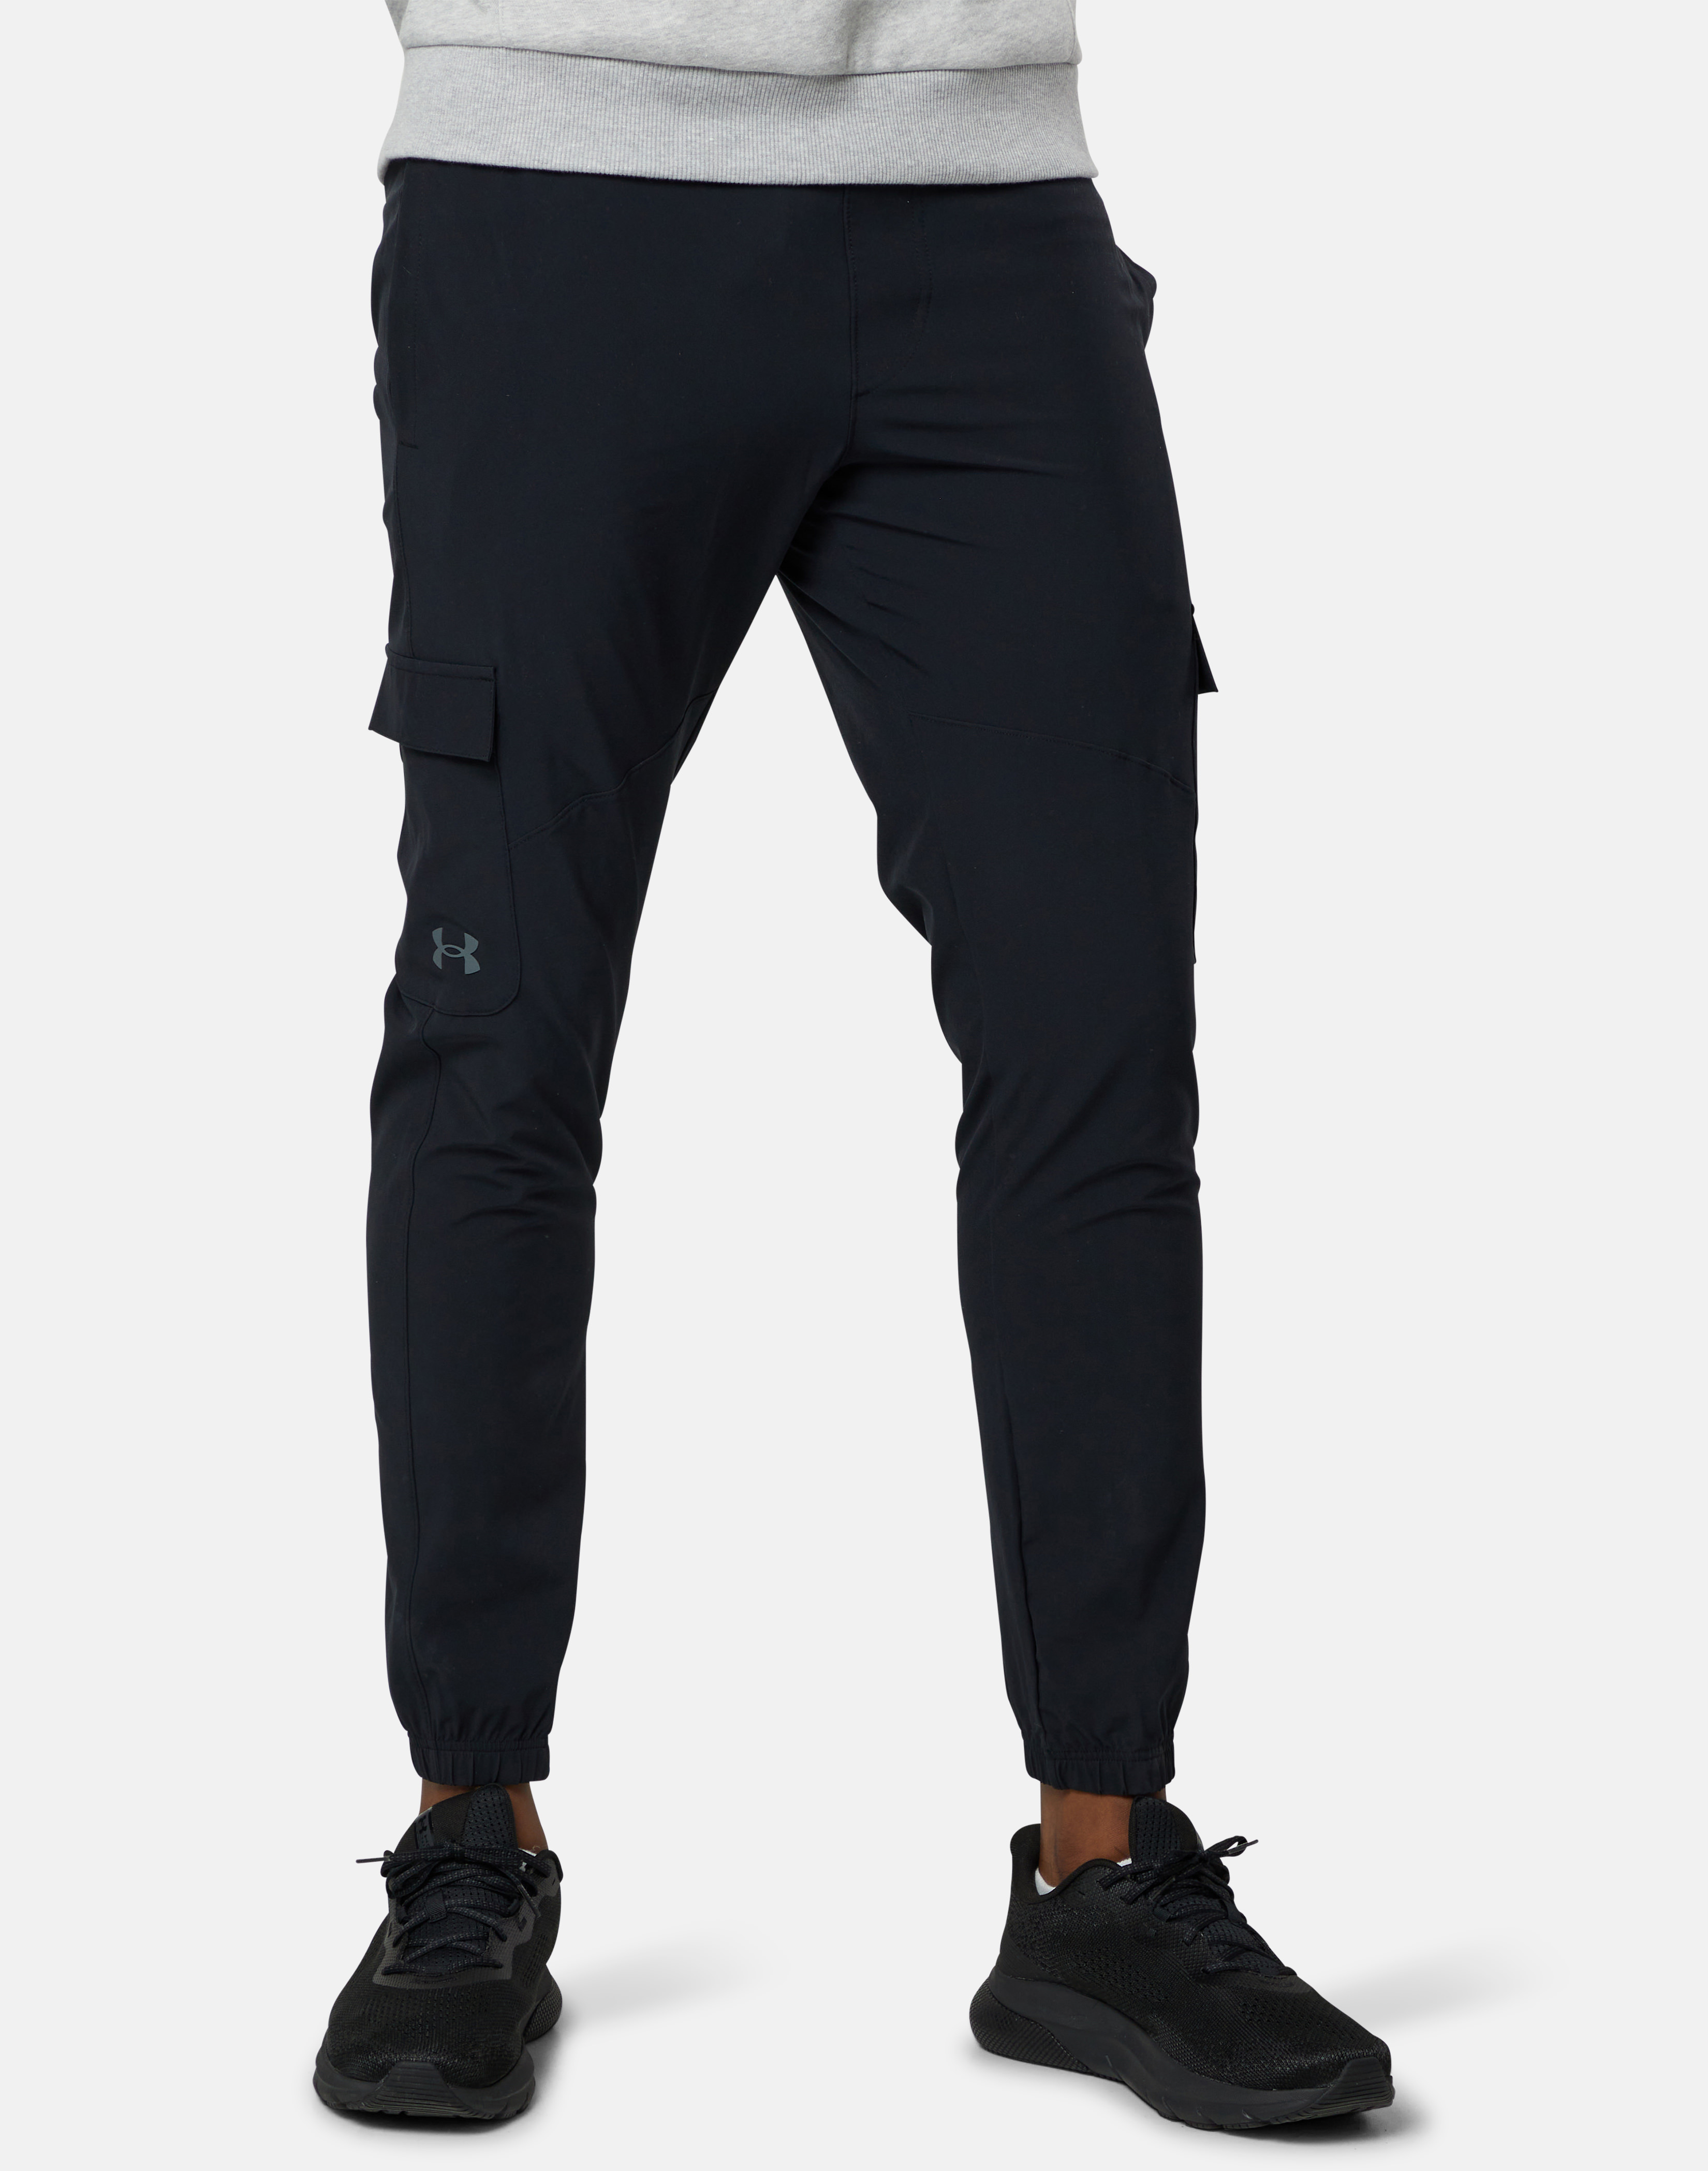 Under Armour Mens Stretch Woven Cargo Pants - Black